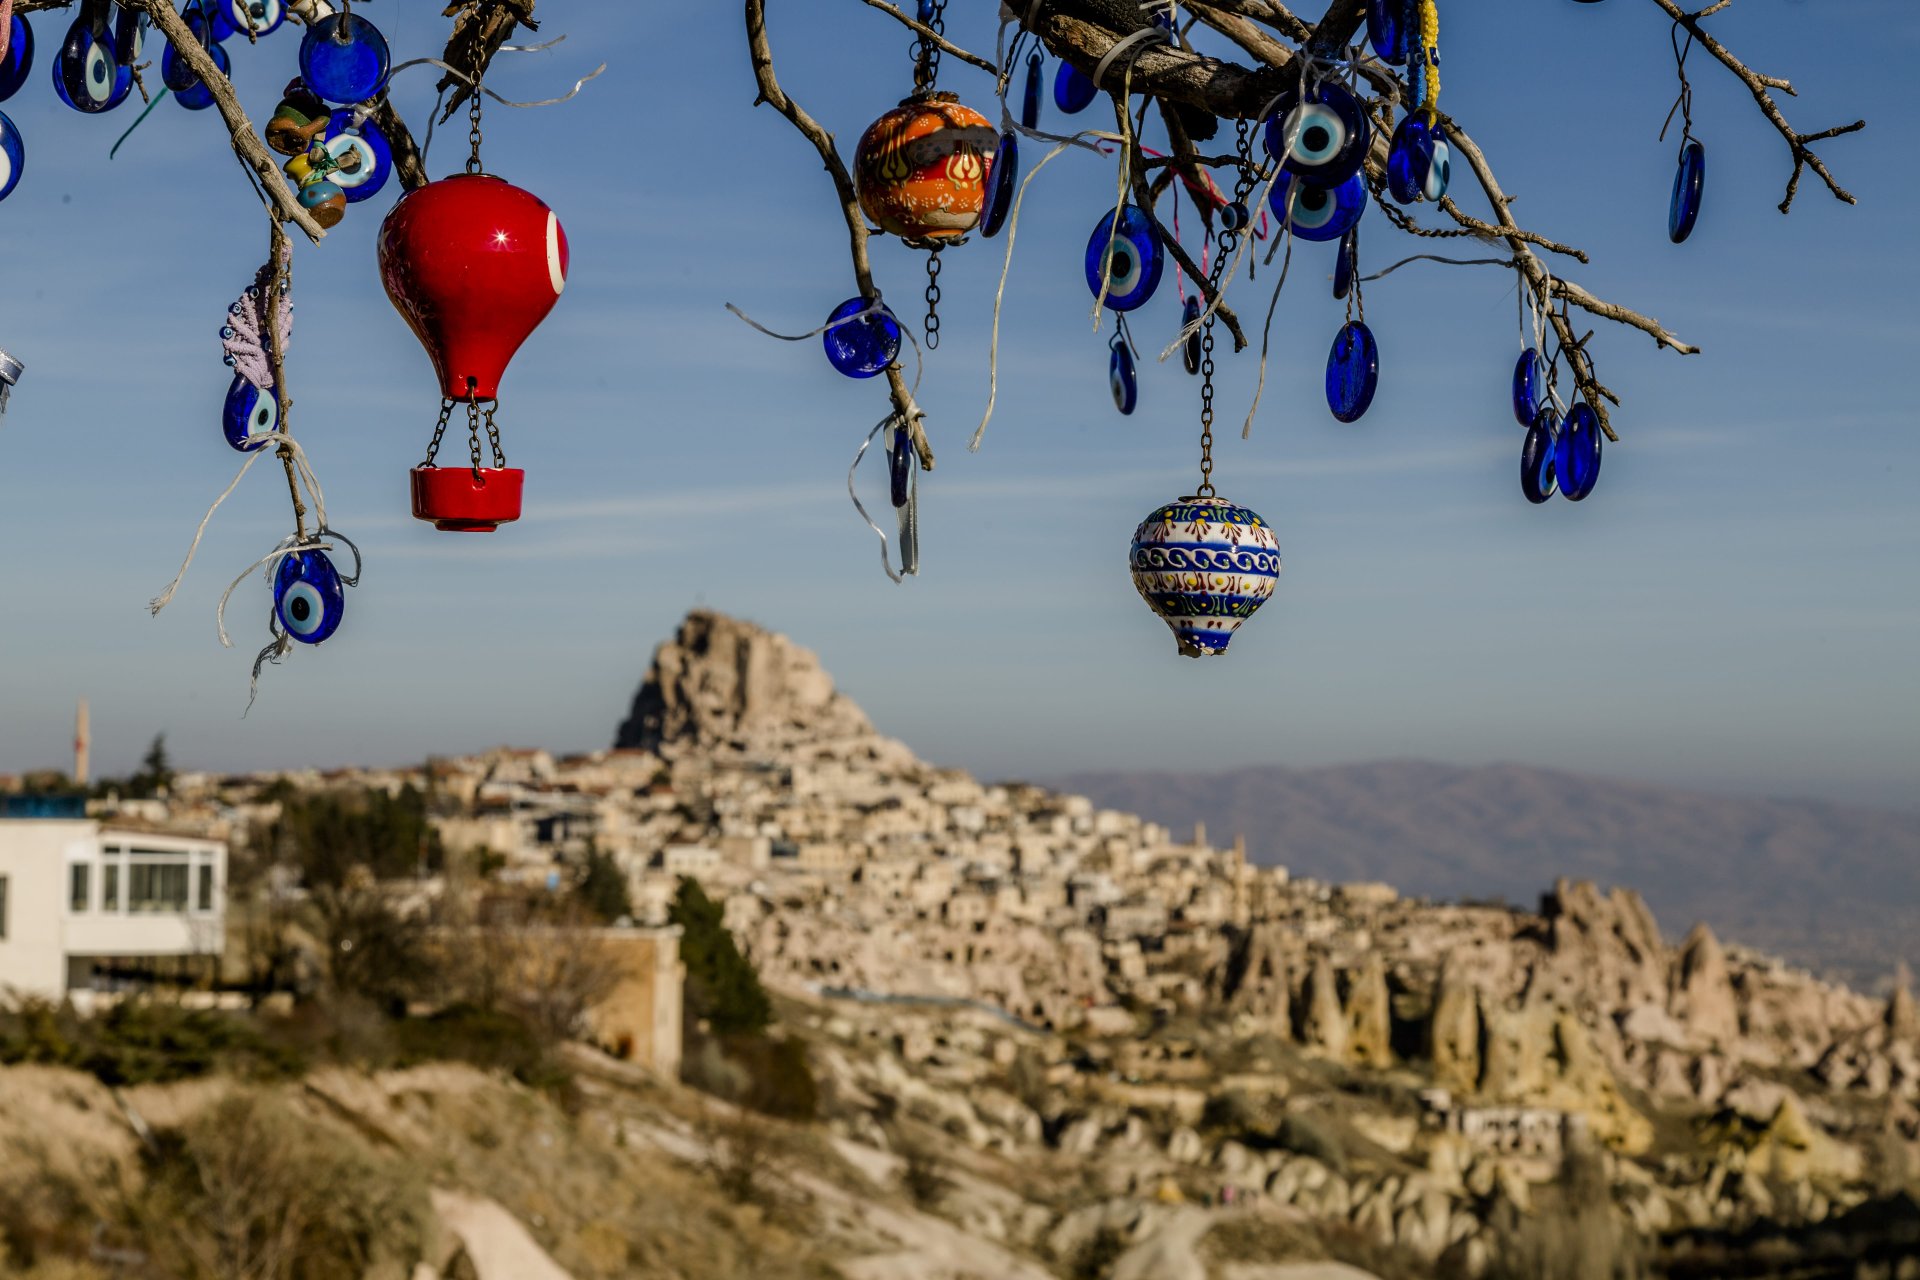 Full Day Tour with Japanese Guide in Cappadocia